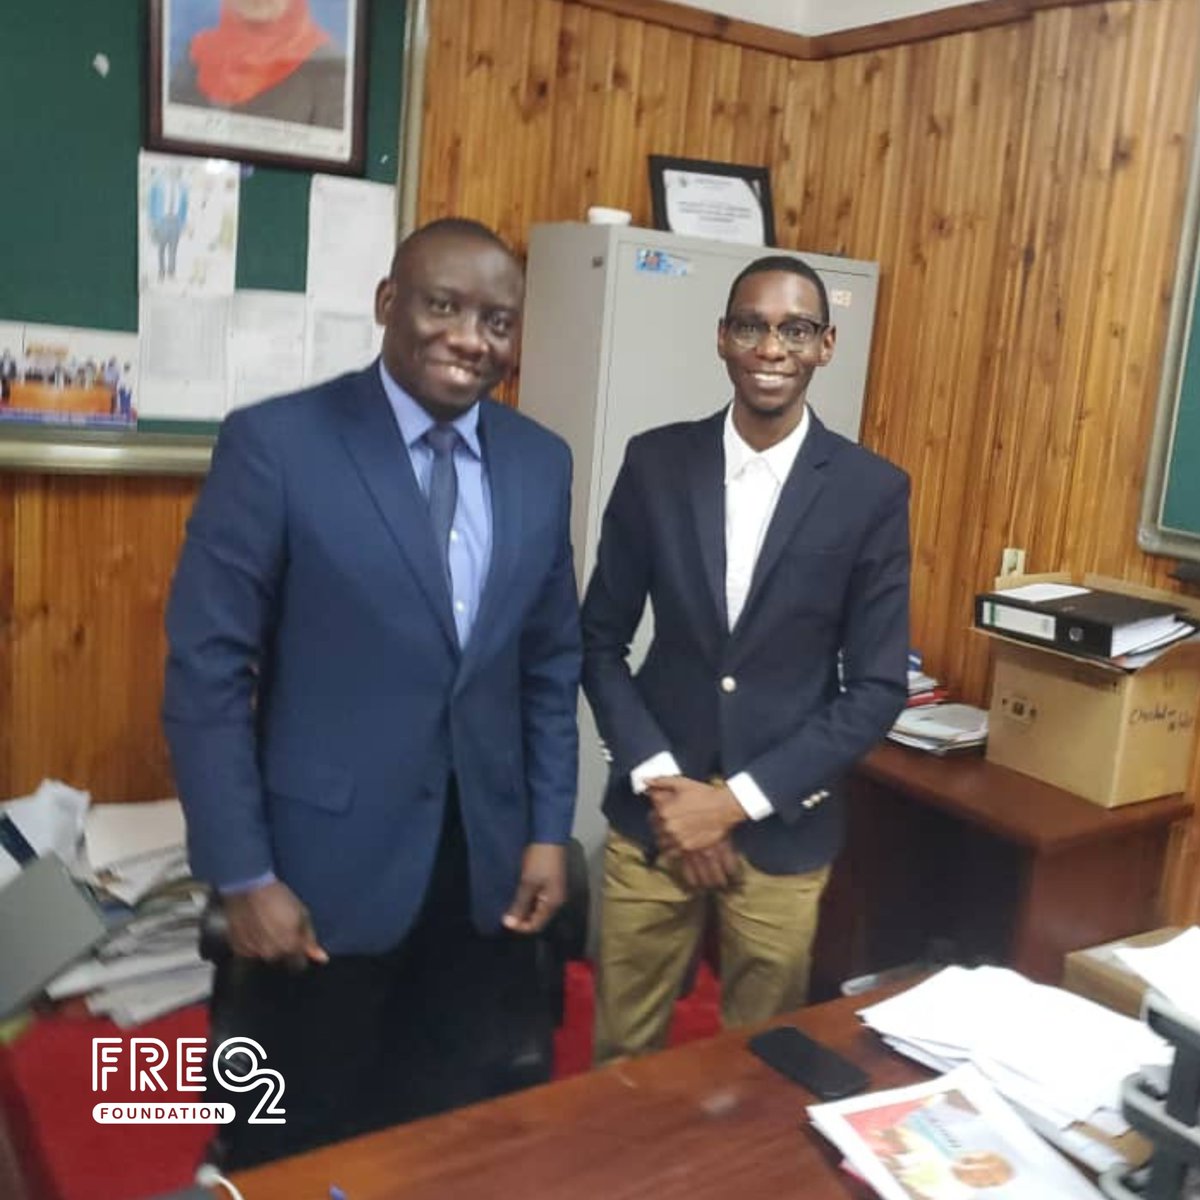 Our Tanzania Programs Manager ,Msira Mageni, had a productive meeting with Dr. Ntuli Kapologwe - Director of Health, Social Welfare and Nutrition Services from the President’s Office – Regional Administration and Local Government (POLARG)...